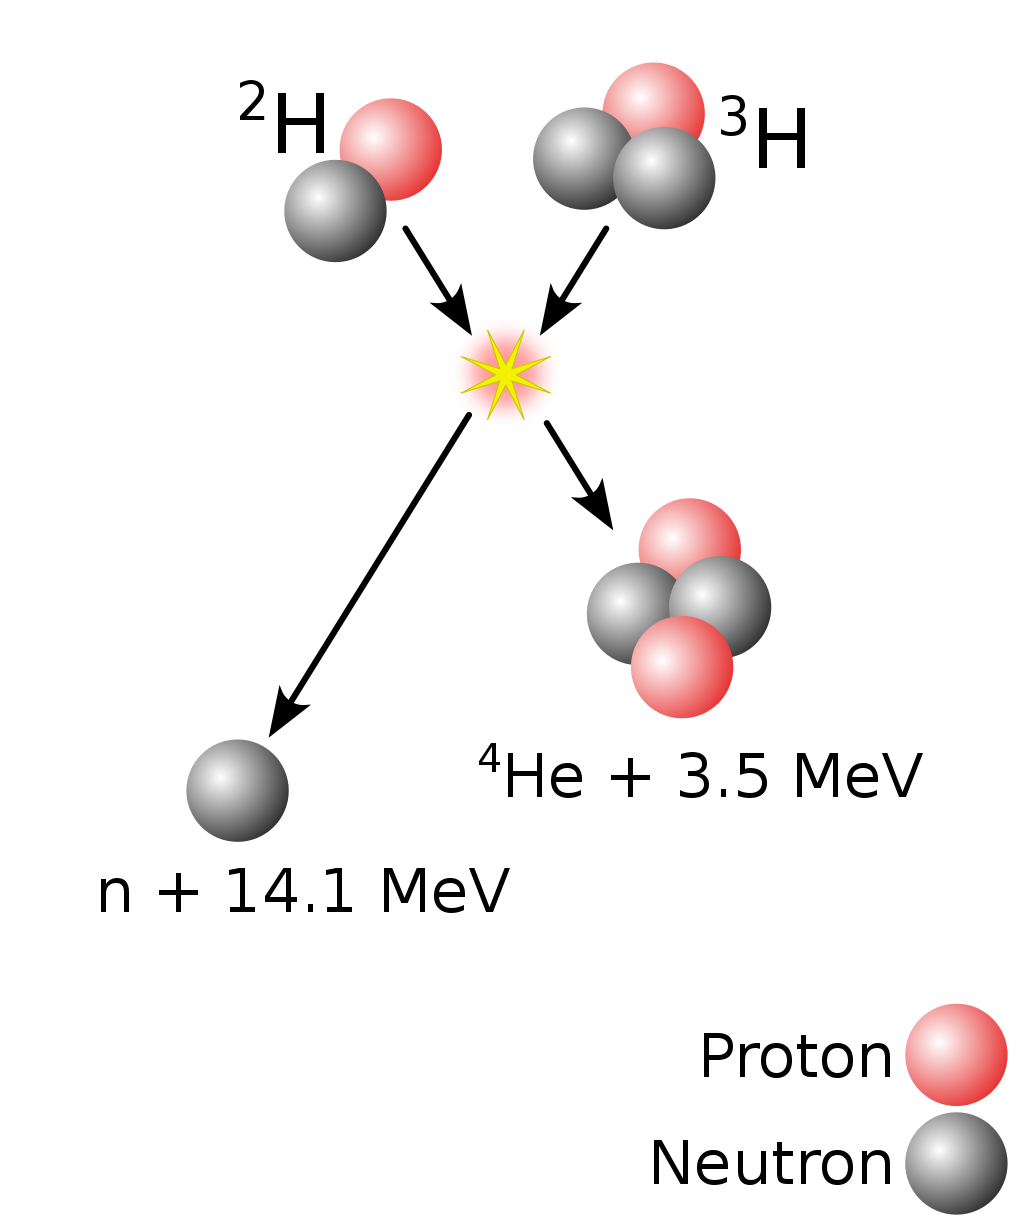 The fusion of deuterium and tritium to form helium-4 (Image from [Wikipedia](https://en.wikipedia.org/wiki/Nuclear_fusion))